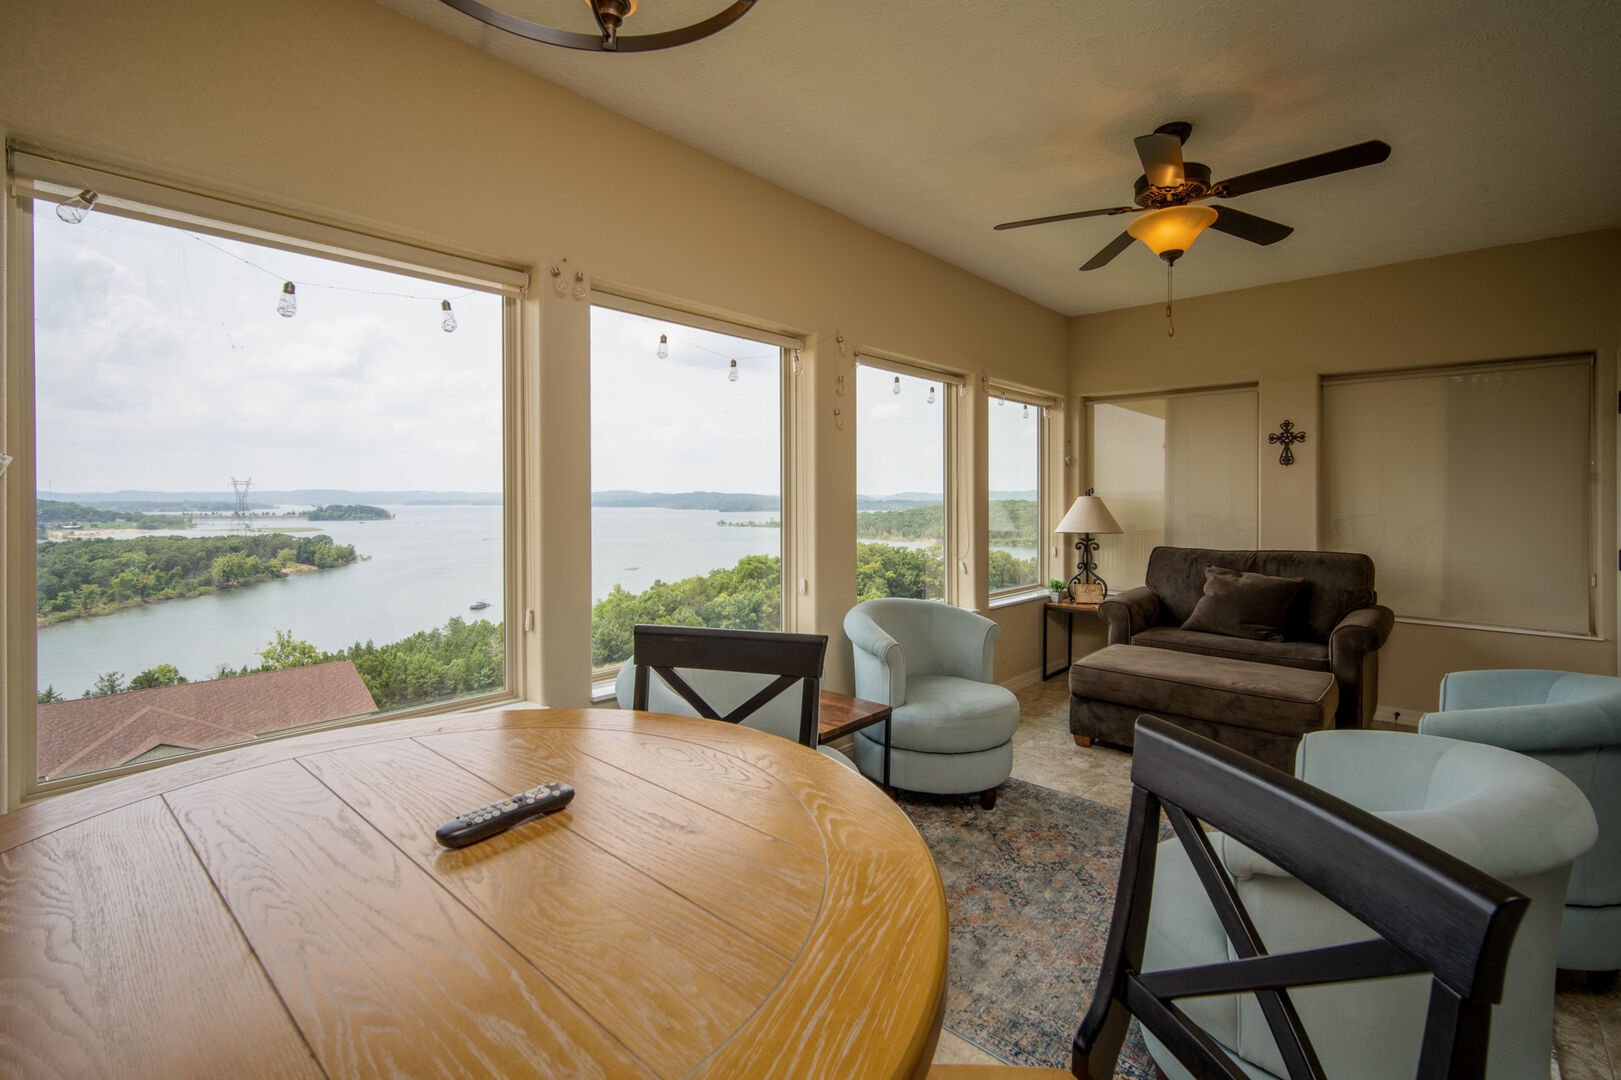 3 Bed, 3 Bath Luxury Condo with Incredible Lake View